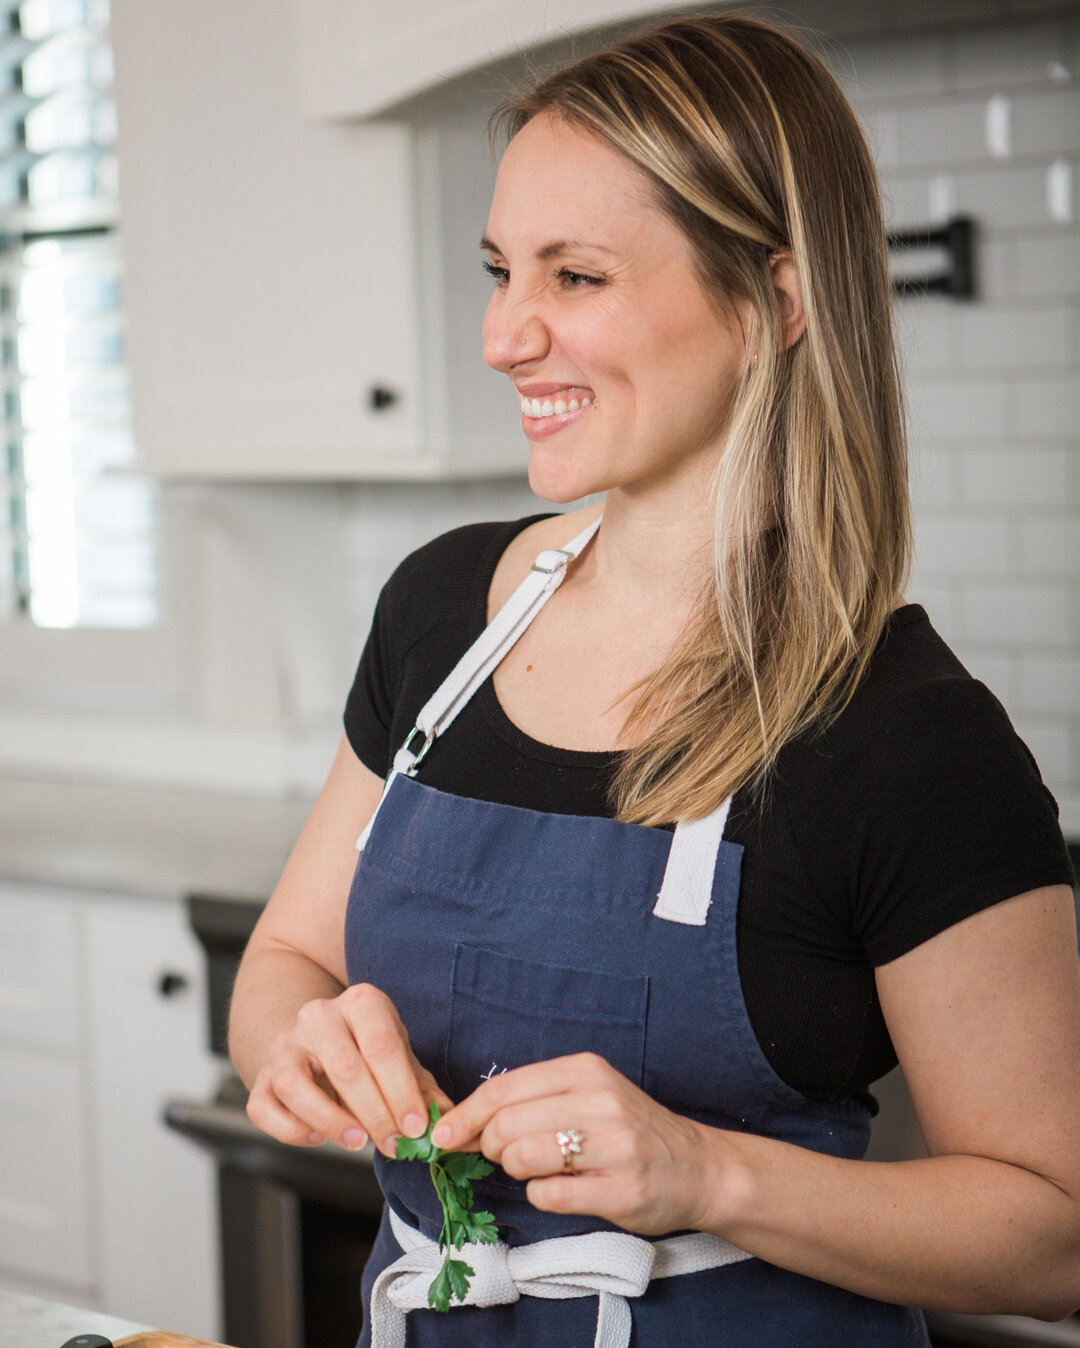 Meet Chef Quincie!​​​​​​​​
Quincie is a trained holistic chef who loves creating delicious, nutritious food with fresh and simple ingredients. She holds her Functional Nuritional Therapy Practitioner certification from the Nutritional Therapy Associa